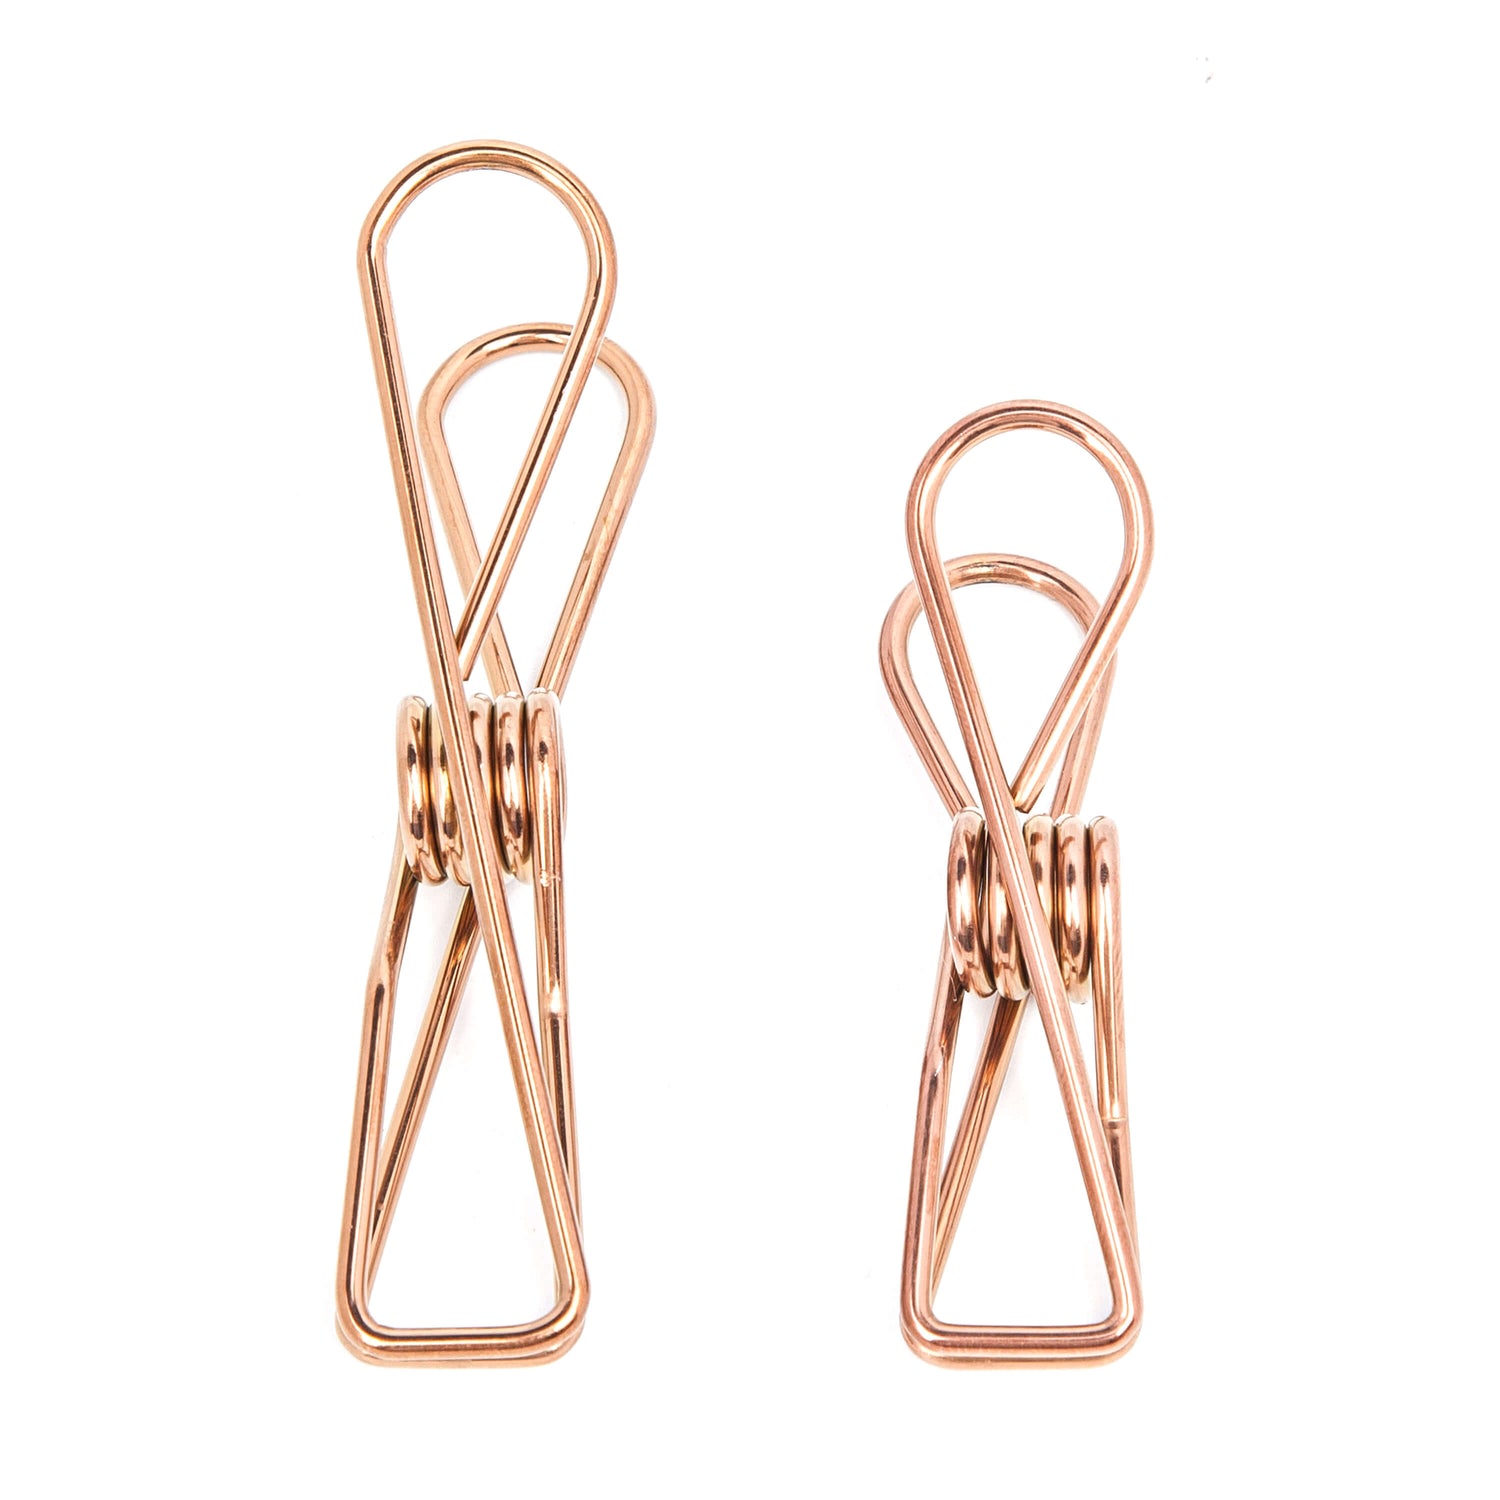 Rose Gold Stainless Clothing Pegs 40 Standard &amp; 10 Large Pegs - EcoLuxe Living